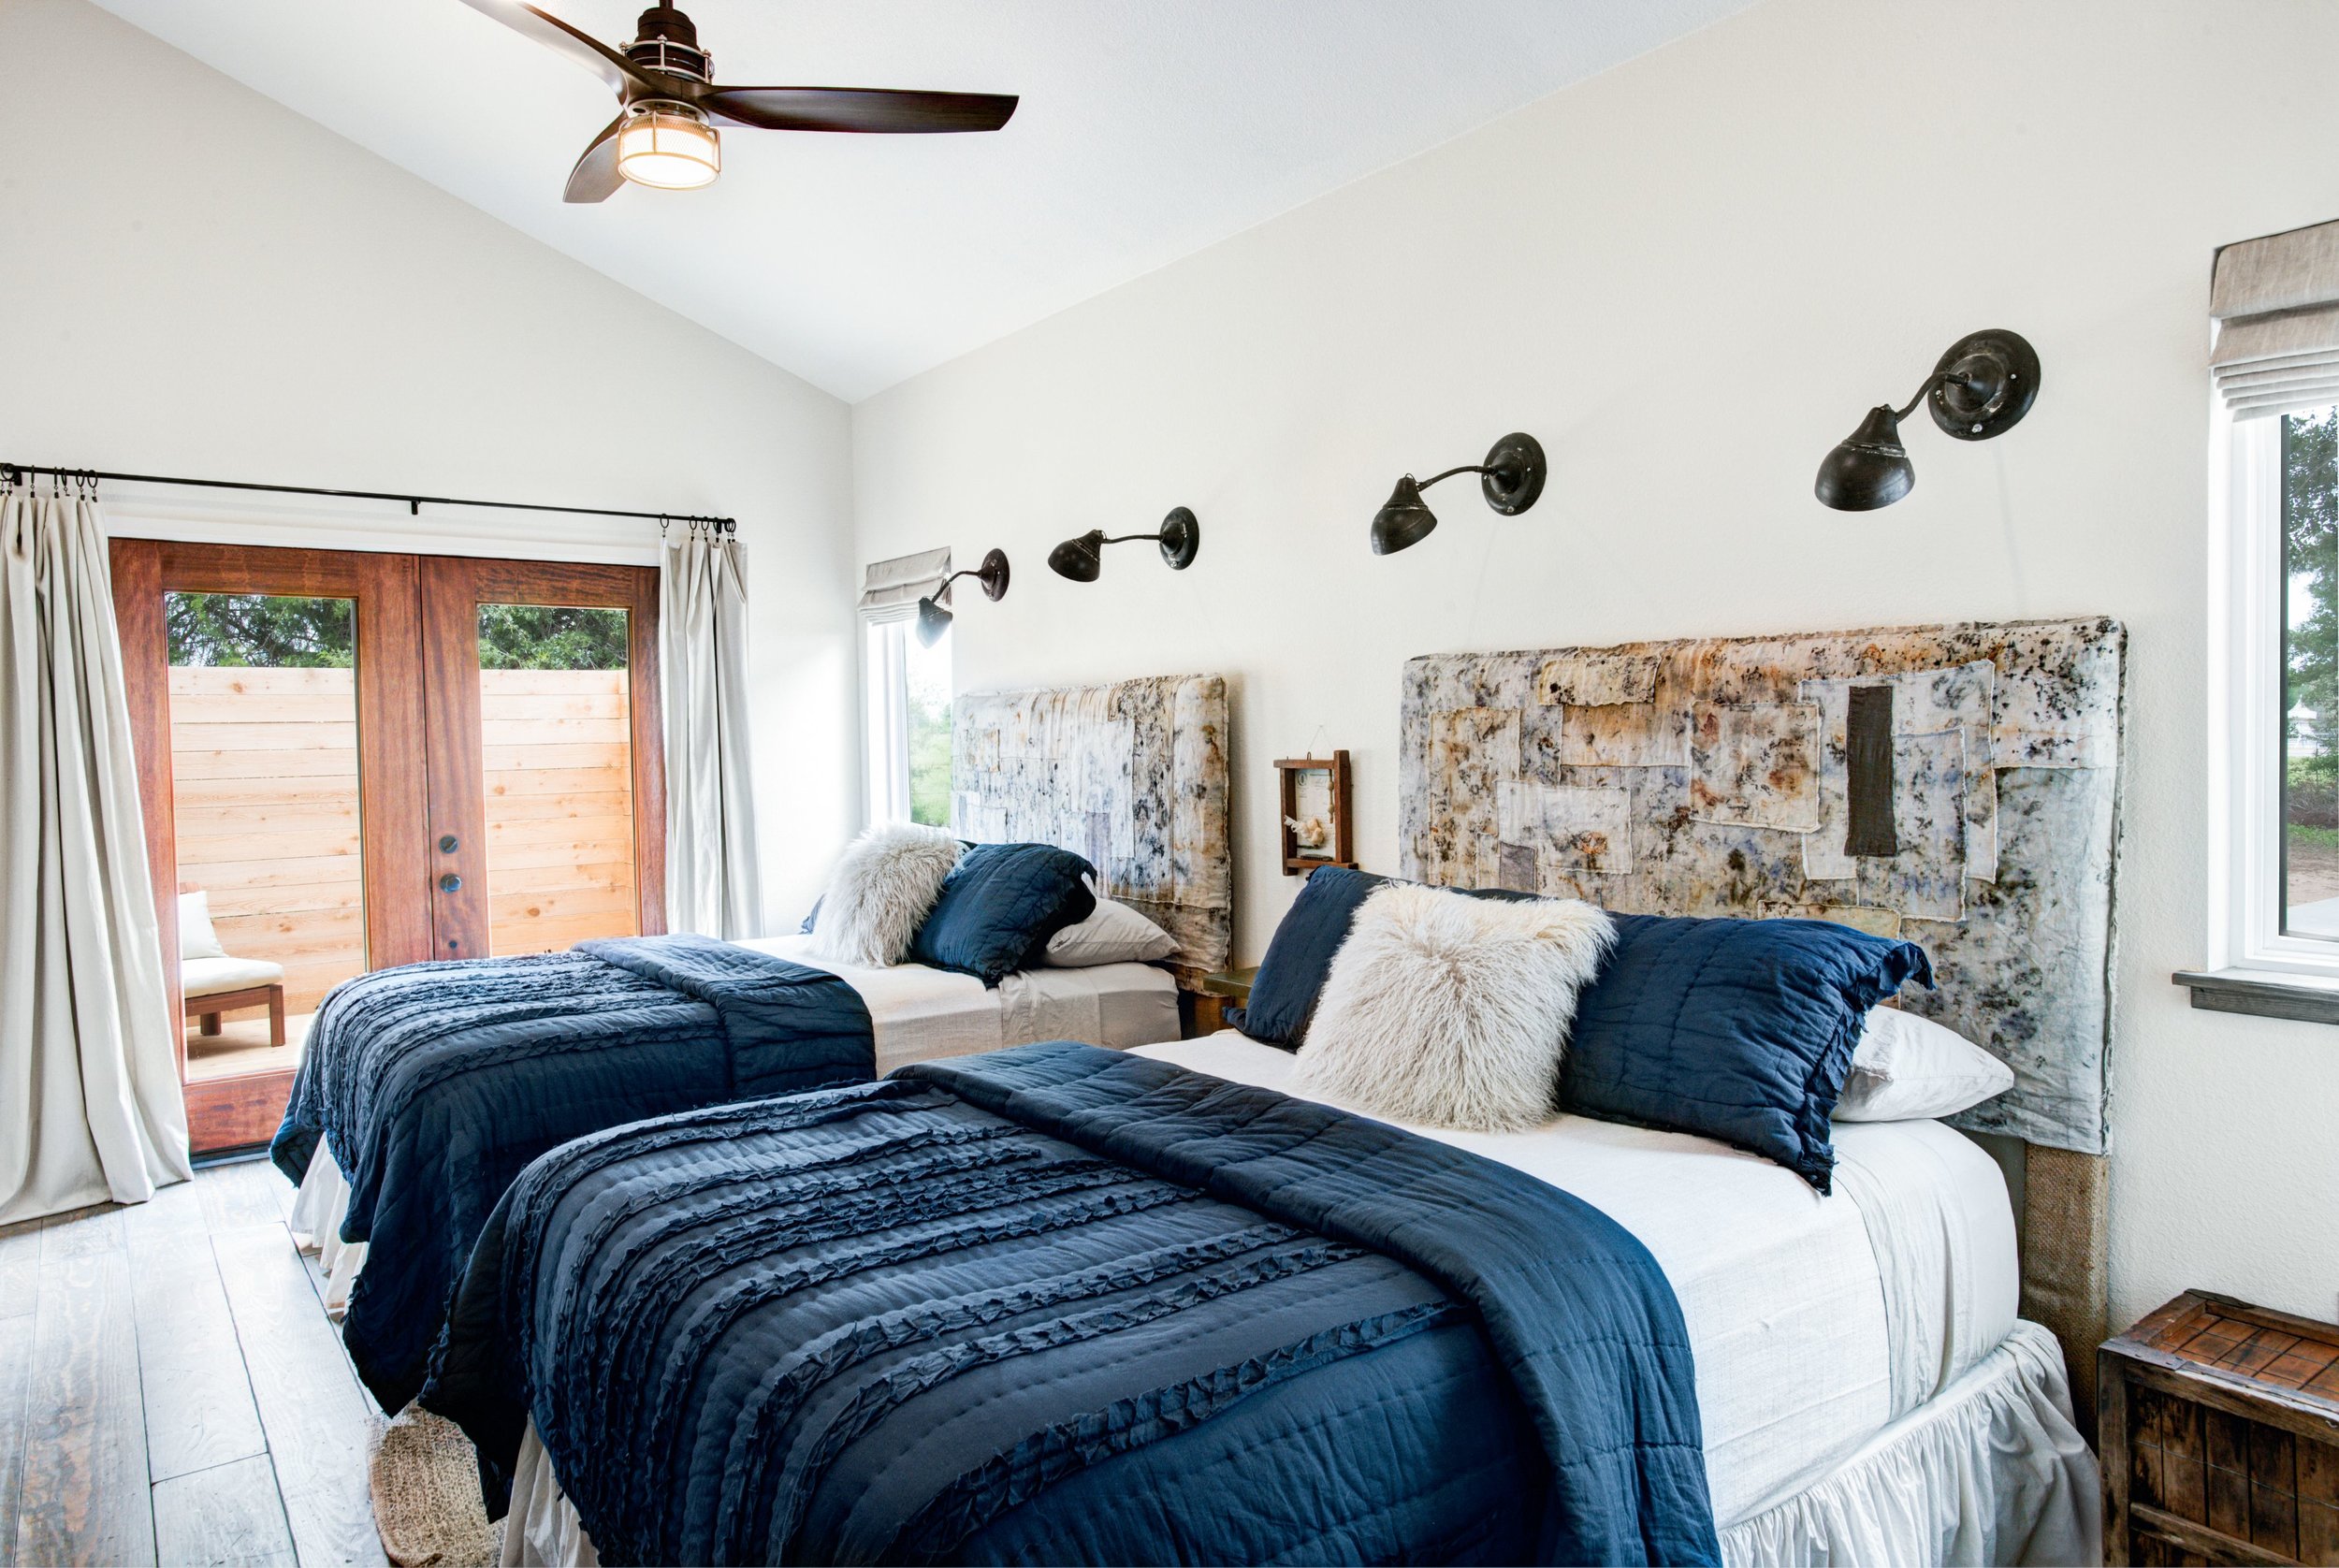   The Boho guest bedroom features two queen-sized bed, ensuite full bath with soaking tub and shower, and a private ensuite patio.  